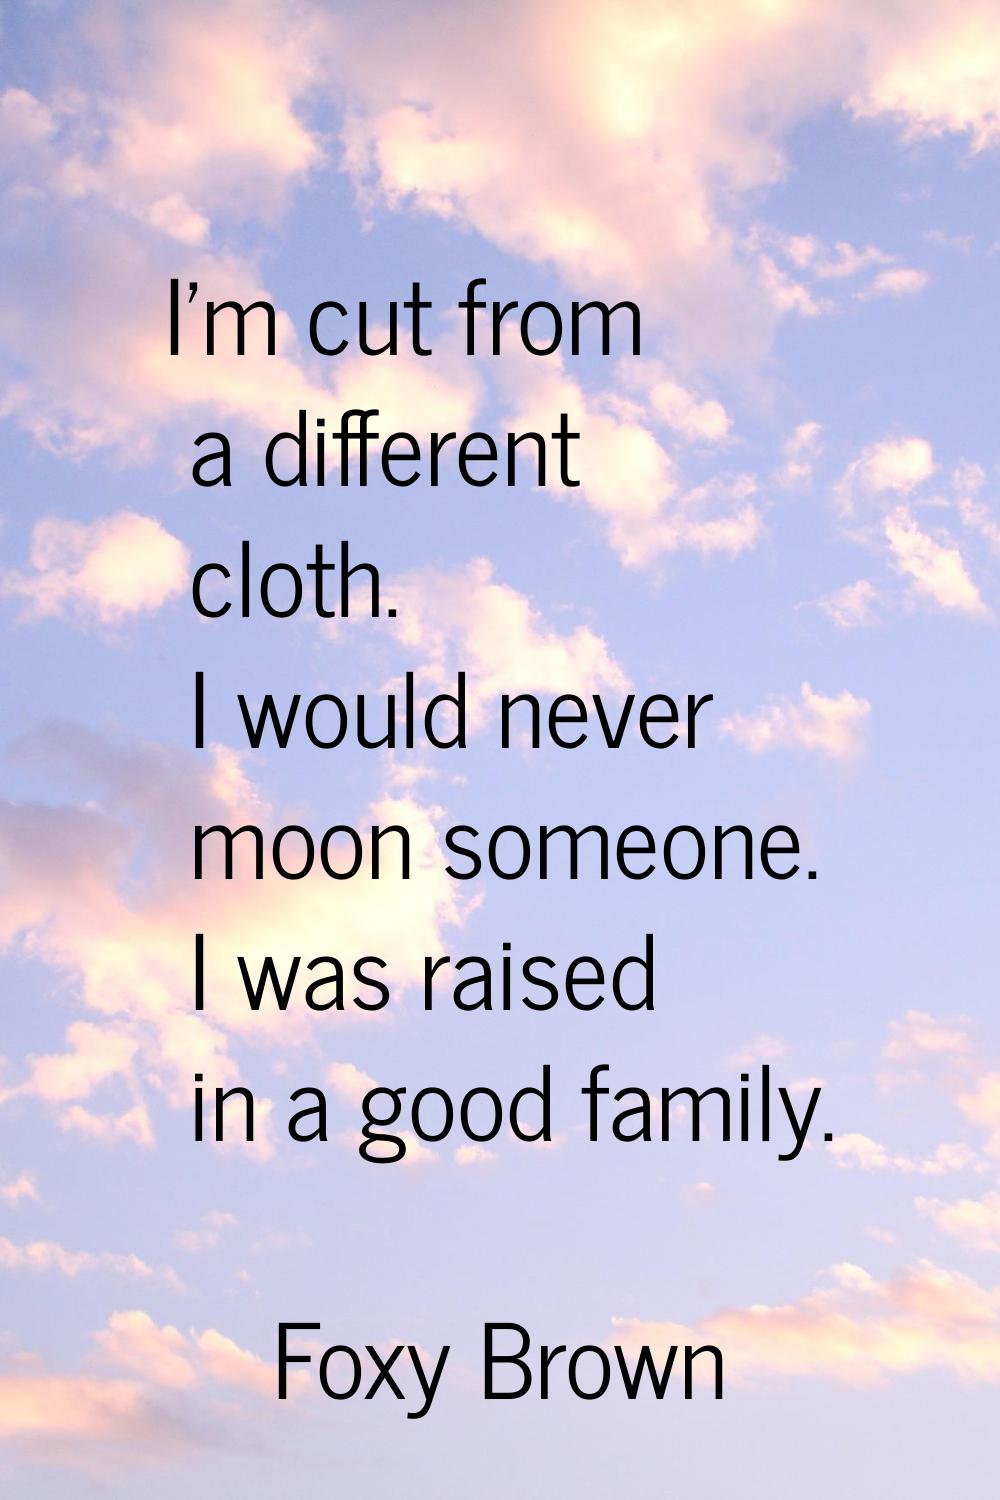 I'm cut from a different cloth. I would never moon someone. I was raised in a good family.